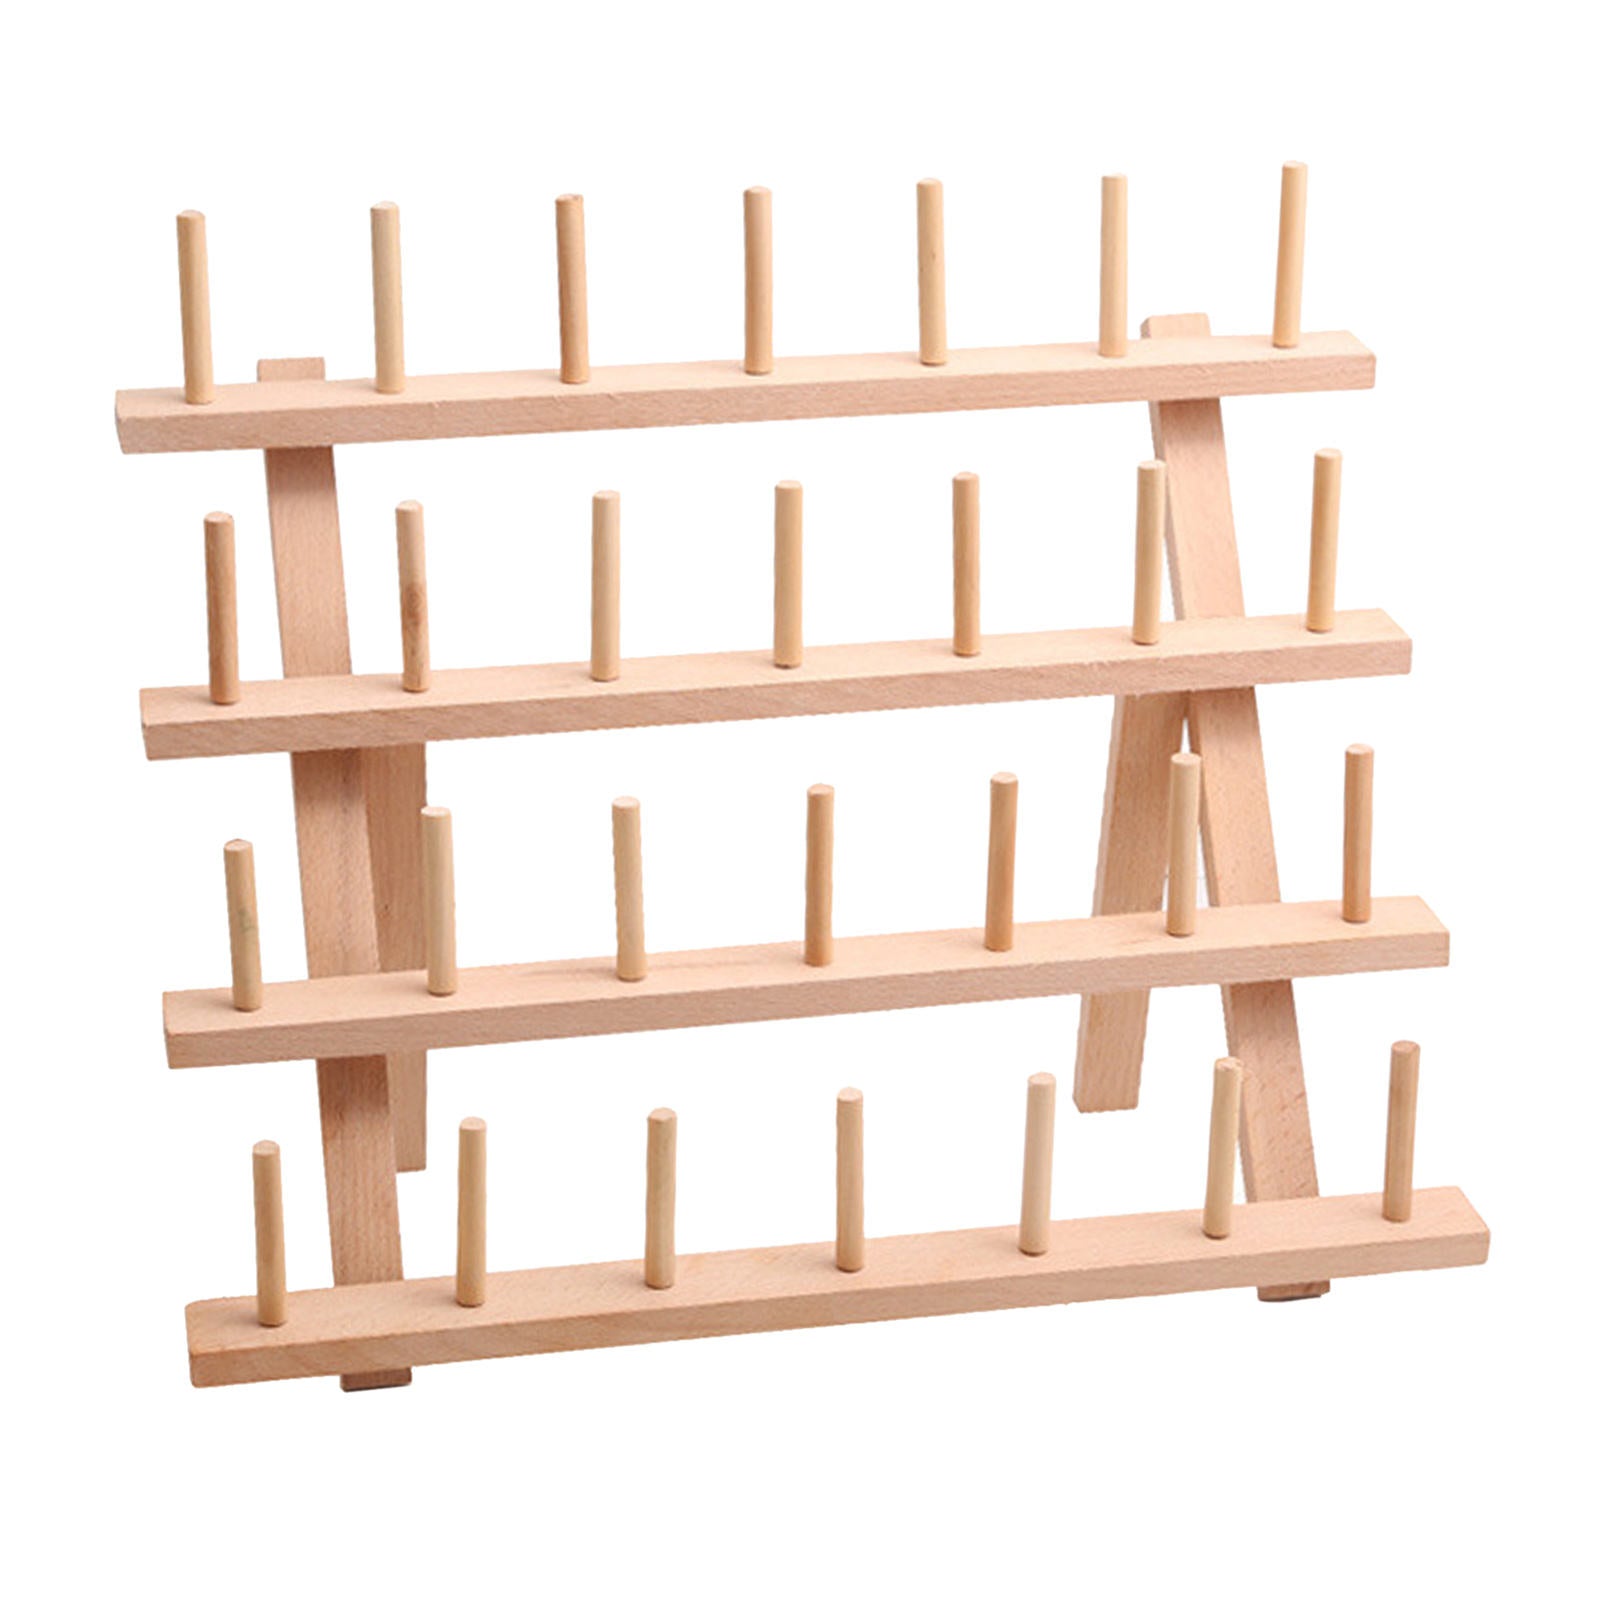 28 Spools Portable Sewing Thread Rack Wooden Holder Shelf Stand Durable